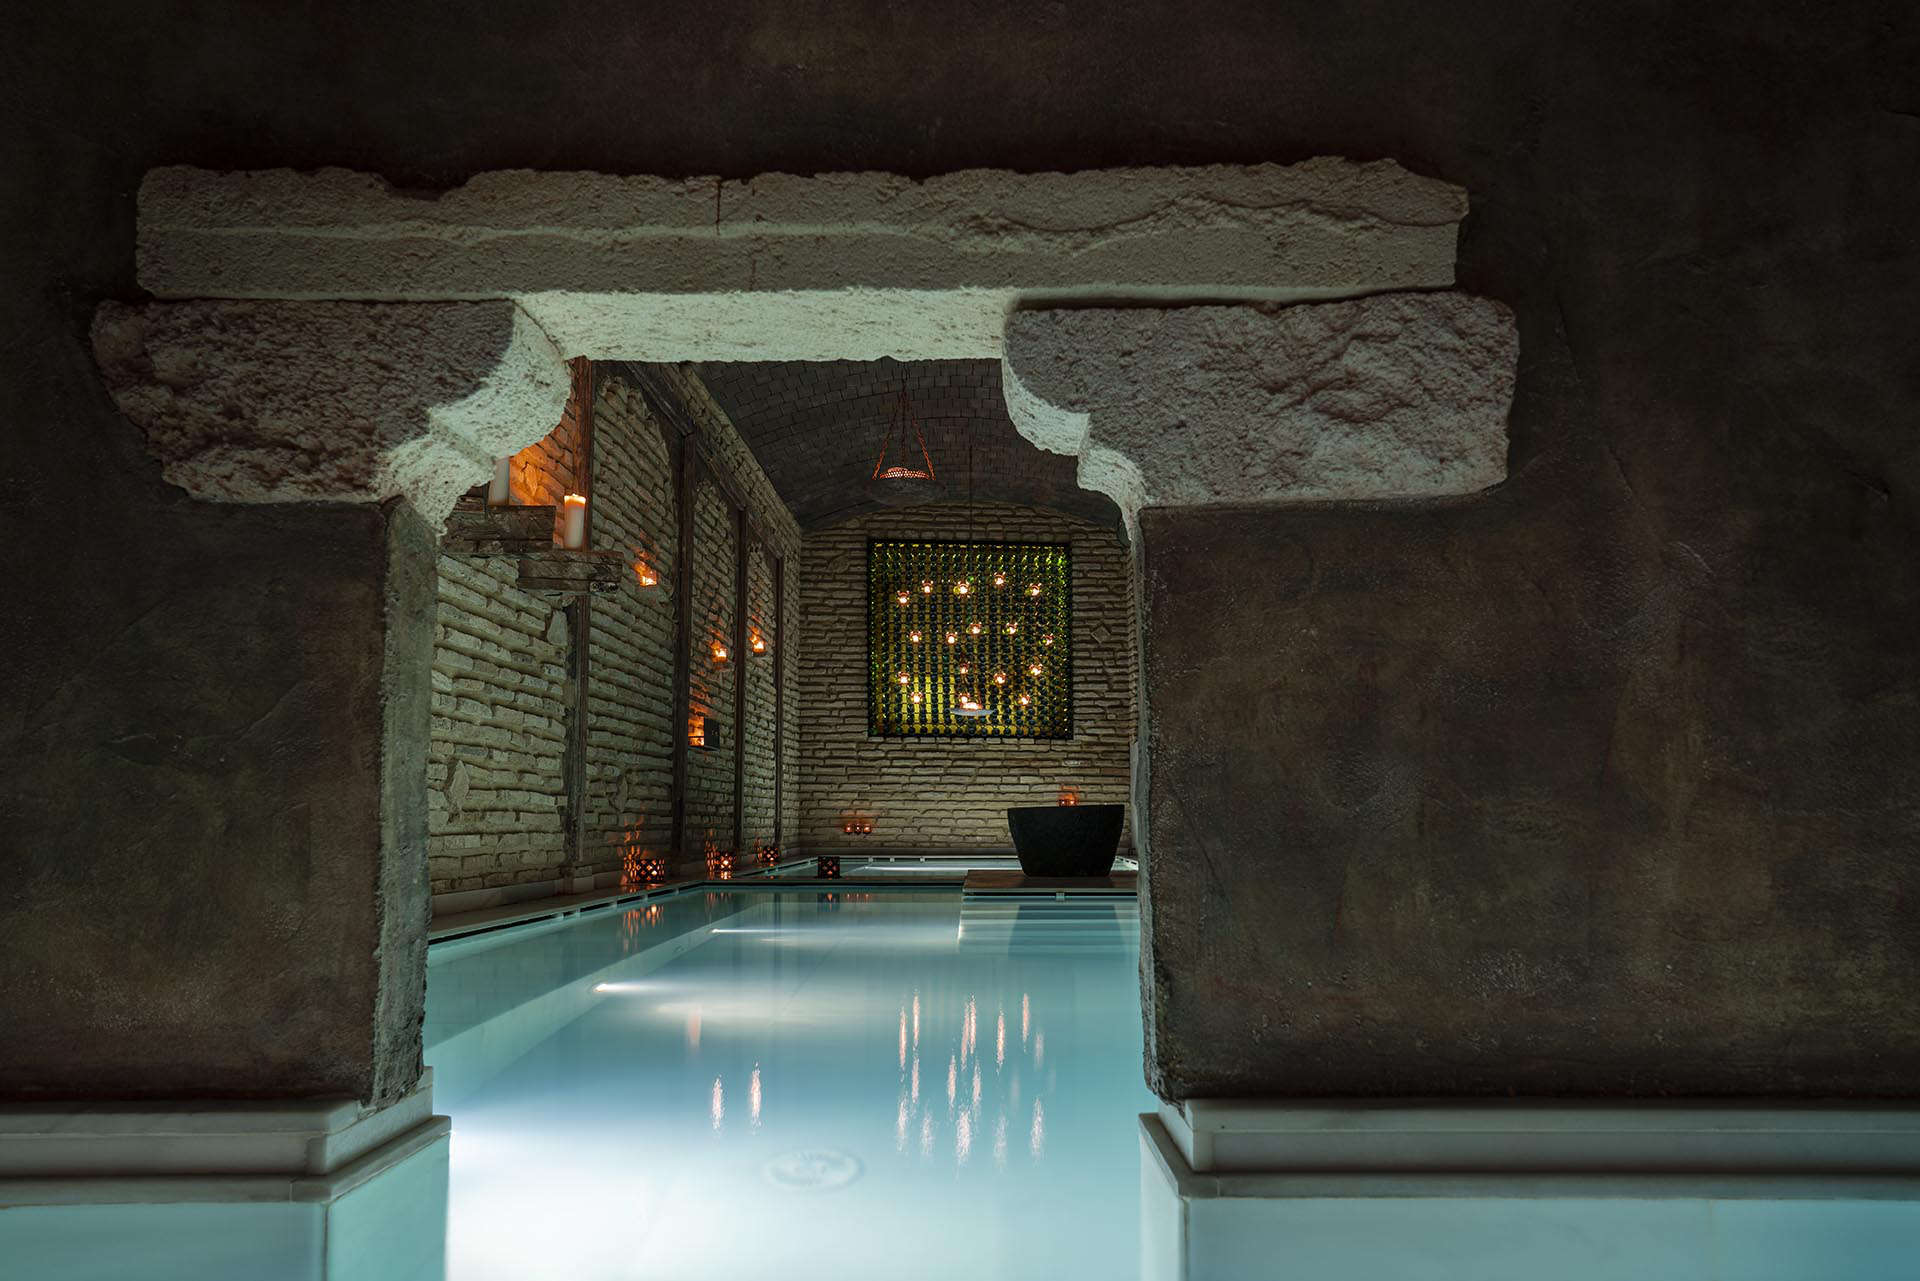 Aire Spa Baths pools with a private area